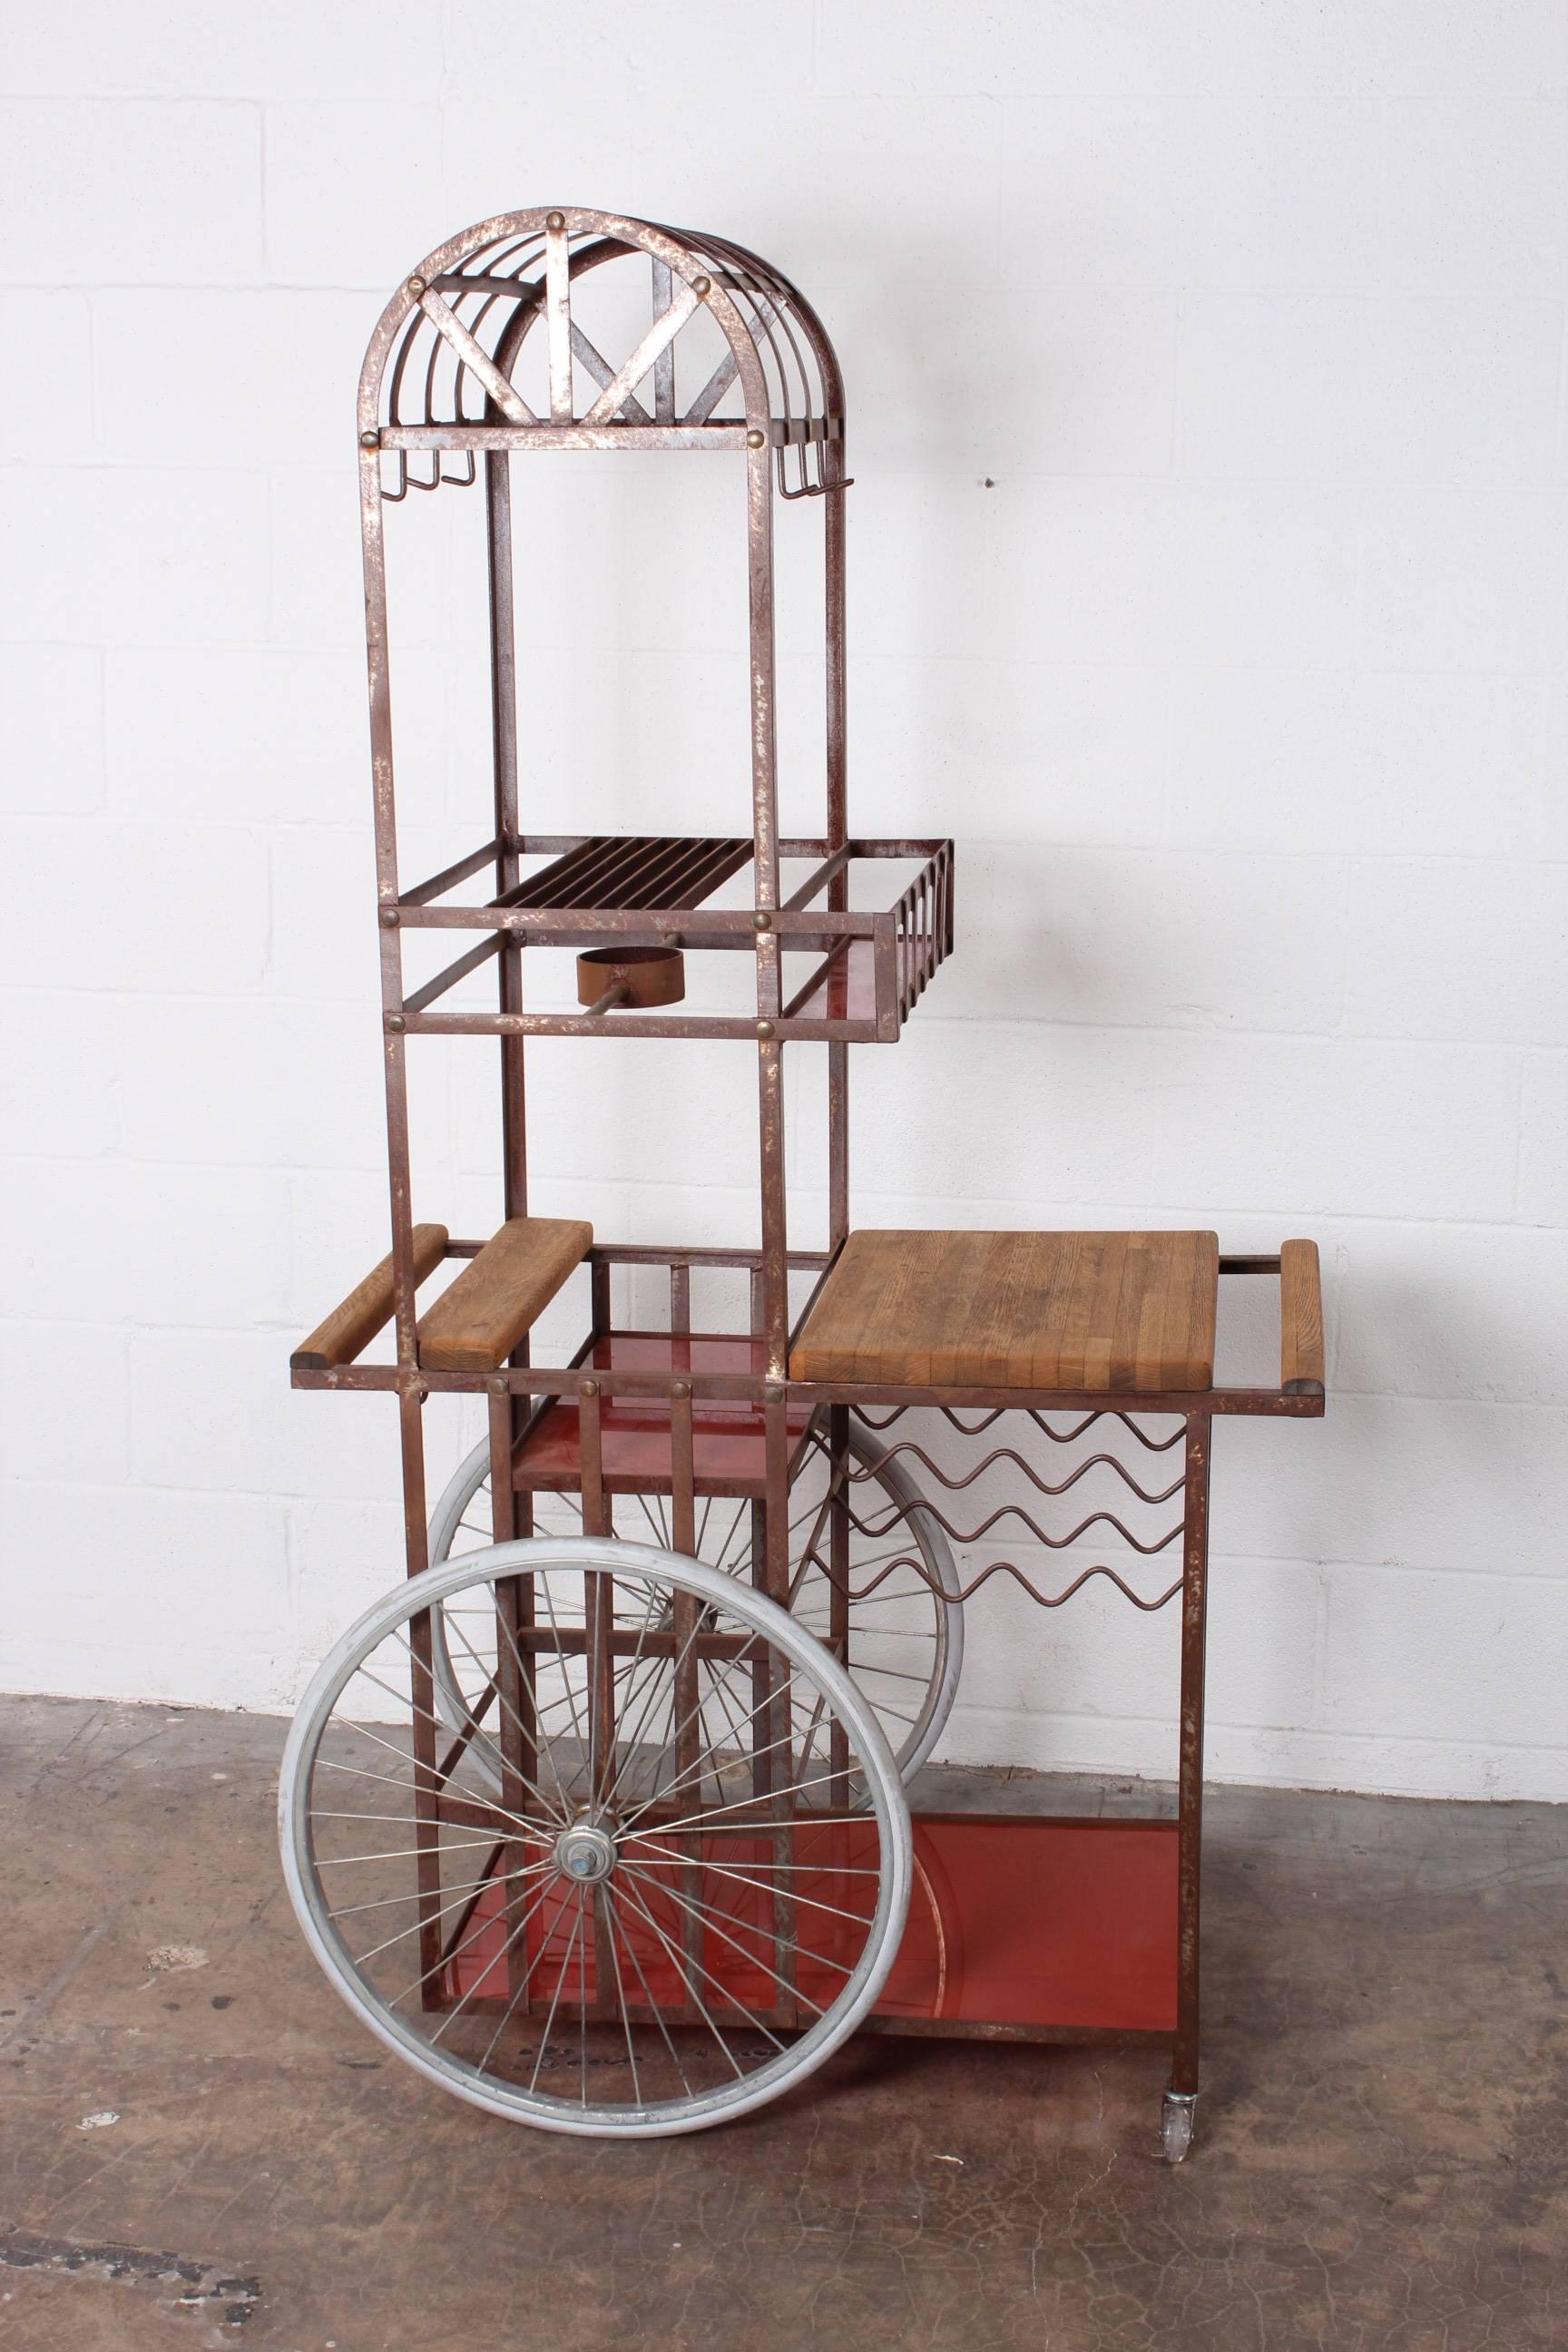 A large bar cart with bicycle wheels and patinated metal frame. Attributed to Bill Sanders.